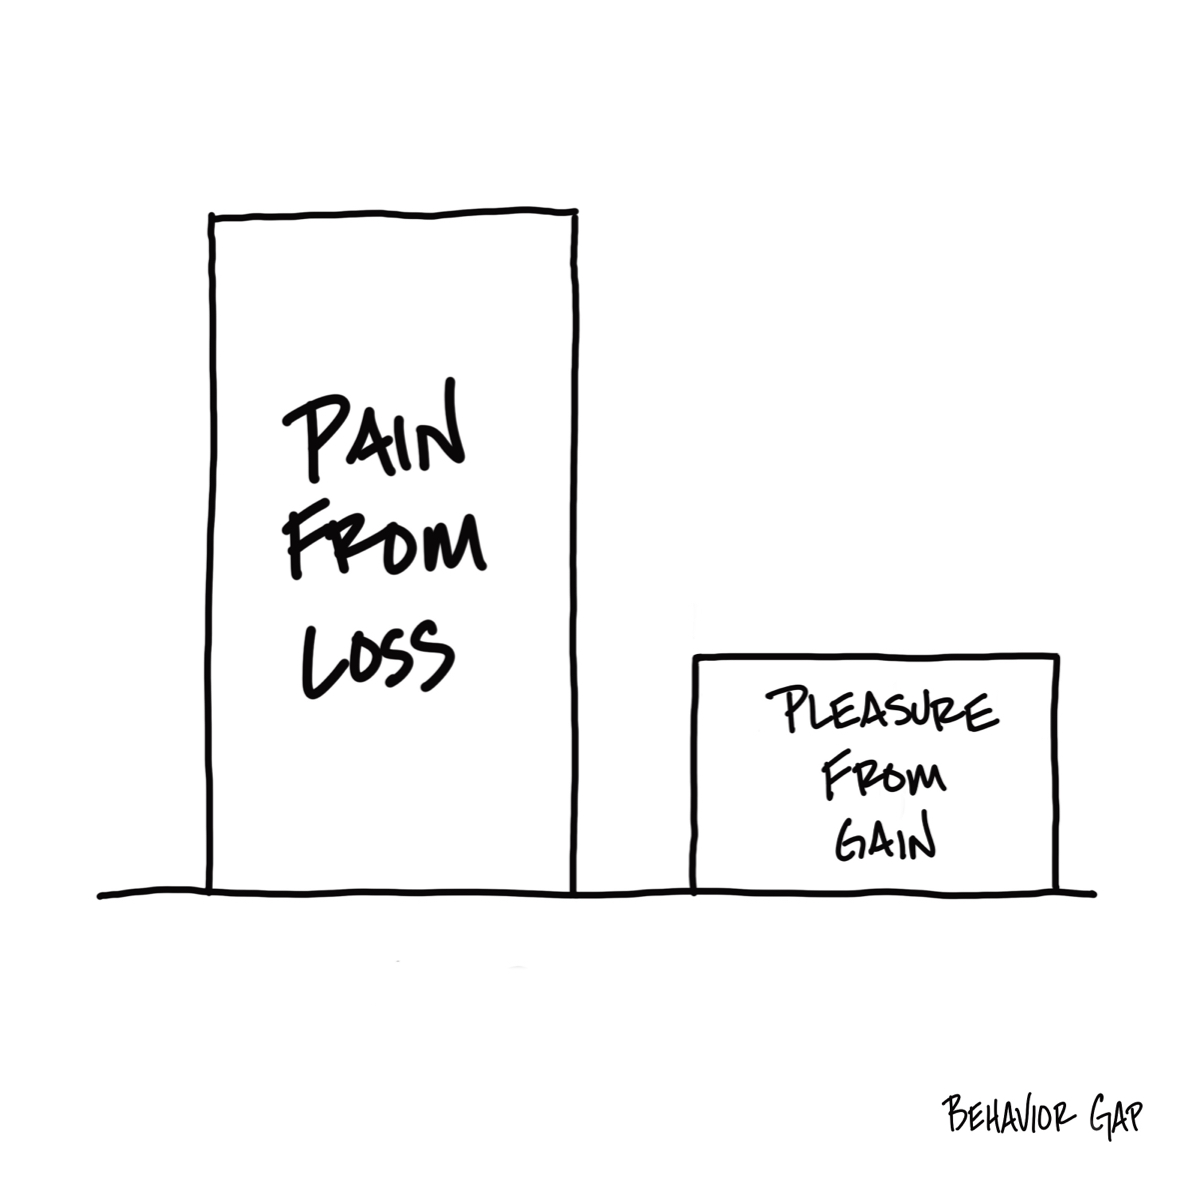 2 boxes the one on the left is larger and it is labeled pain from loss. The smaller one on the right is labeled pleasure from gain.